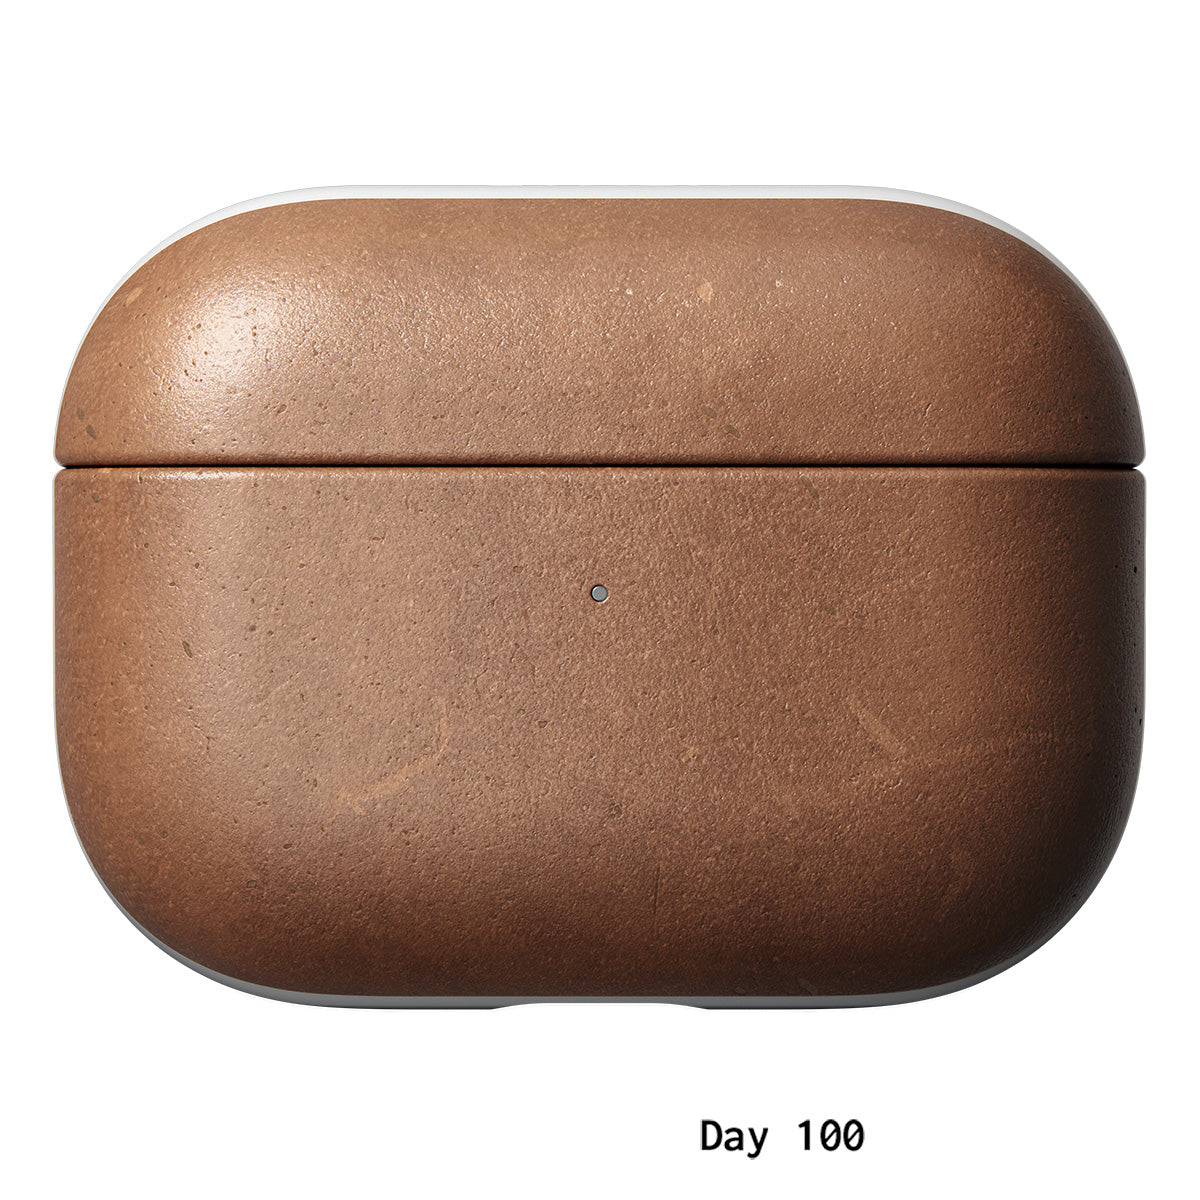 AirPods Pro Case - Leather Edition - SANDMARC